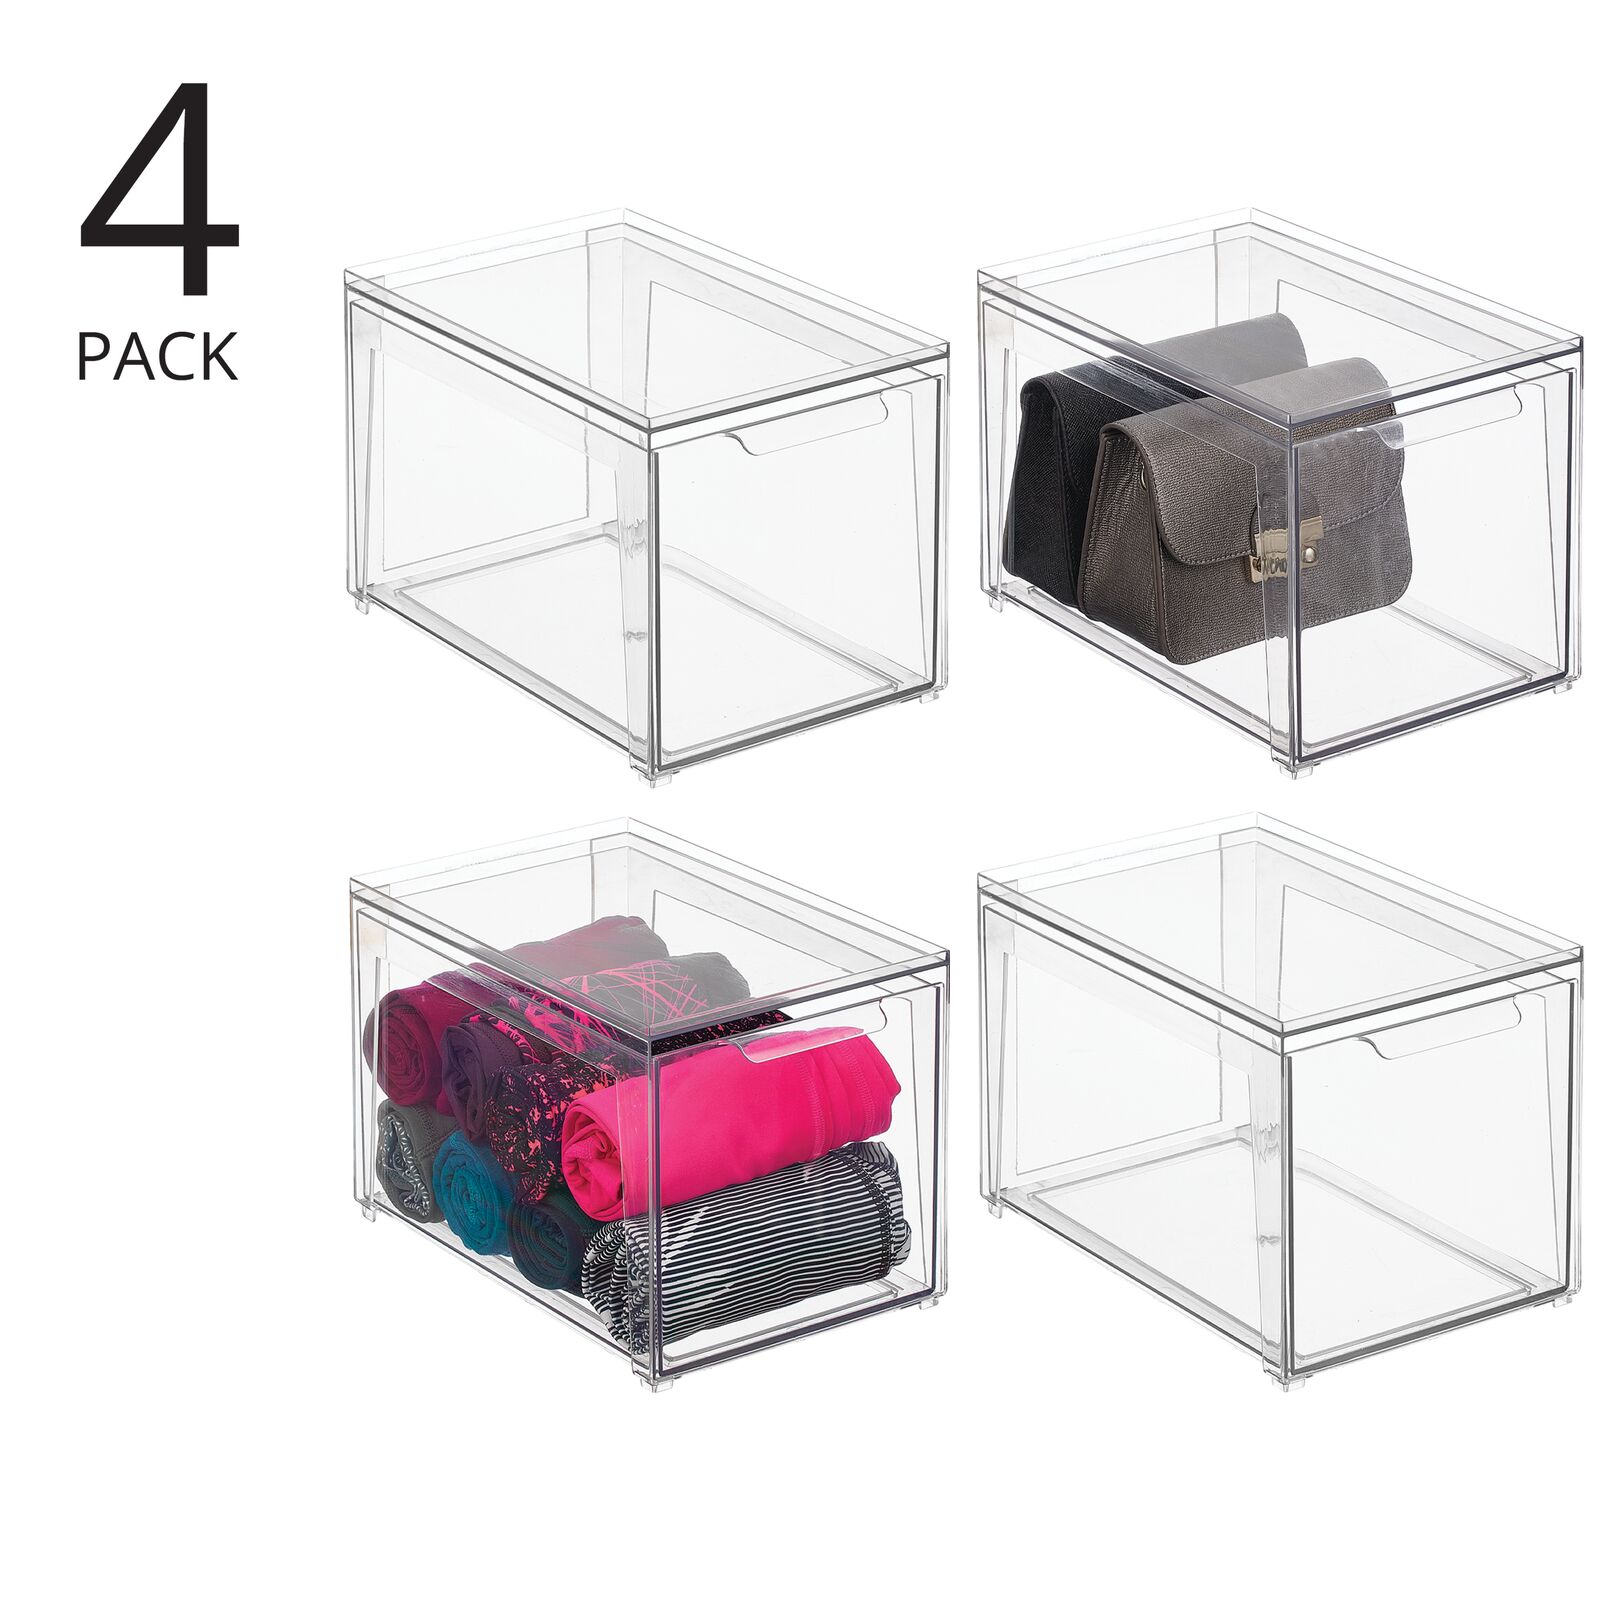 mDesign Household Plastic Storage Organizer Bin with Open Front - 8 Pack -  Clear